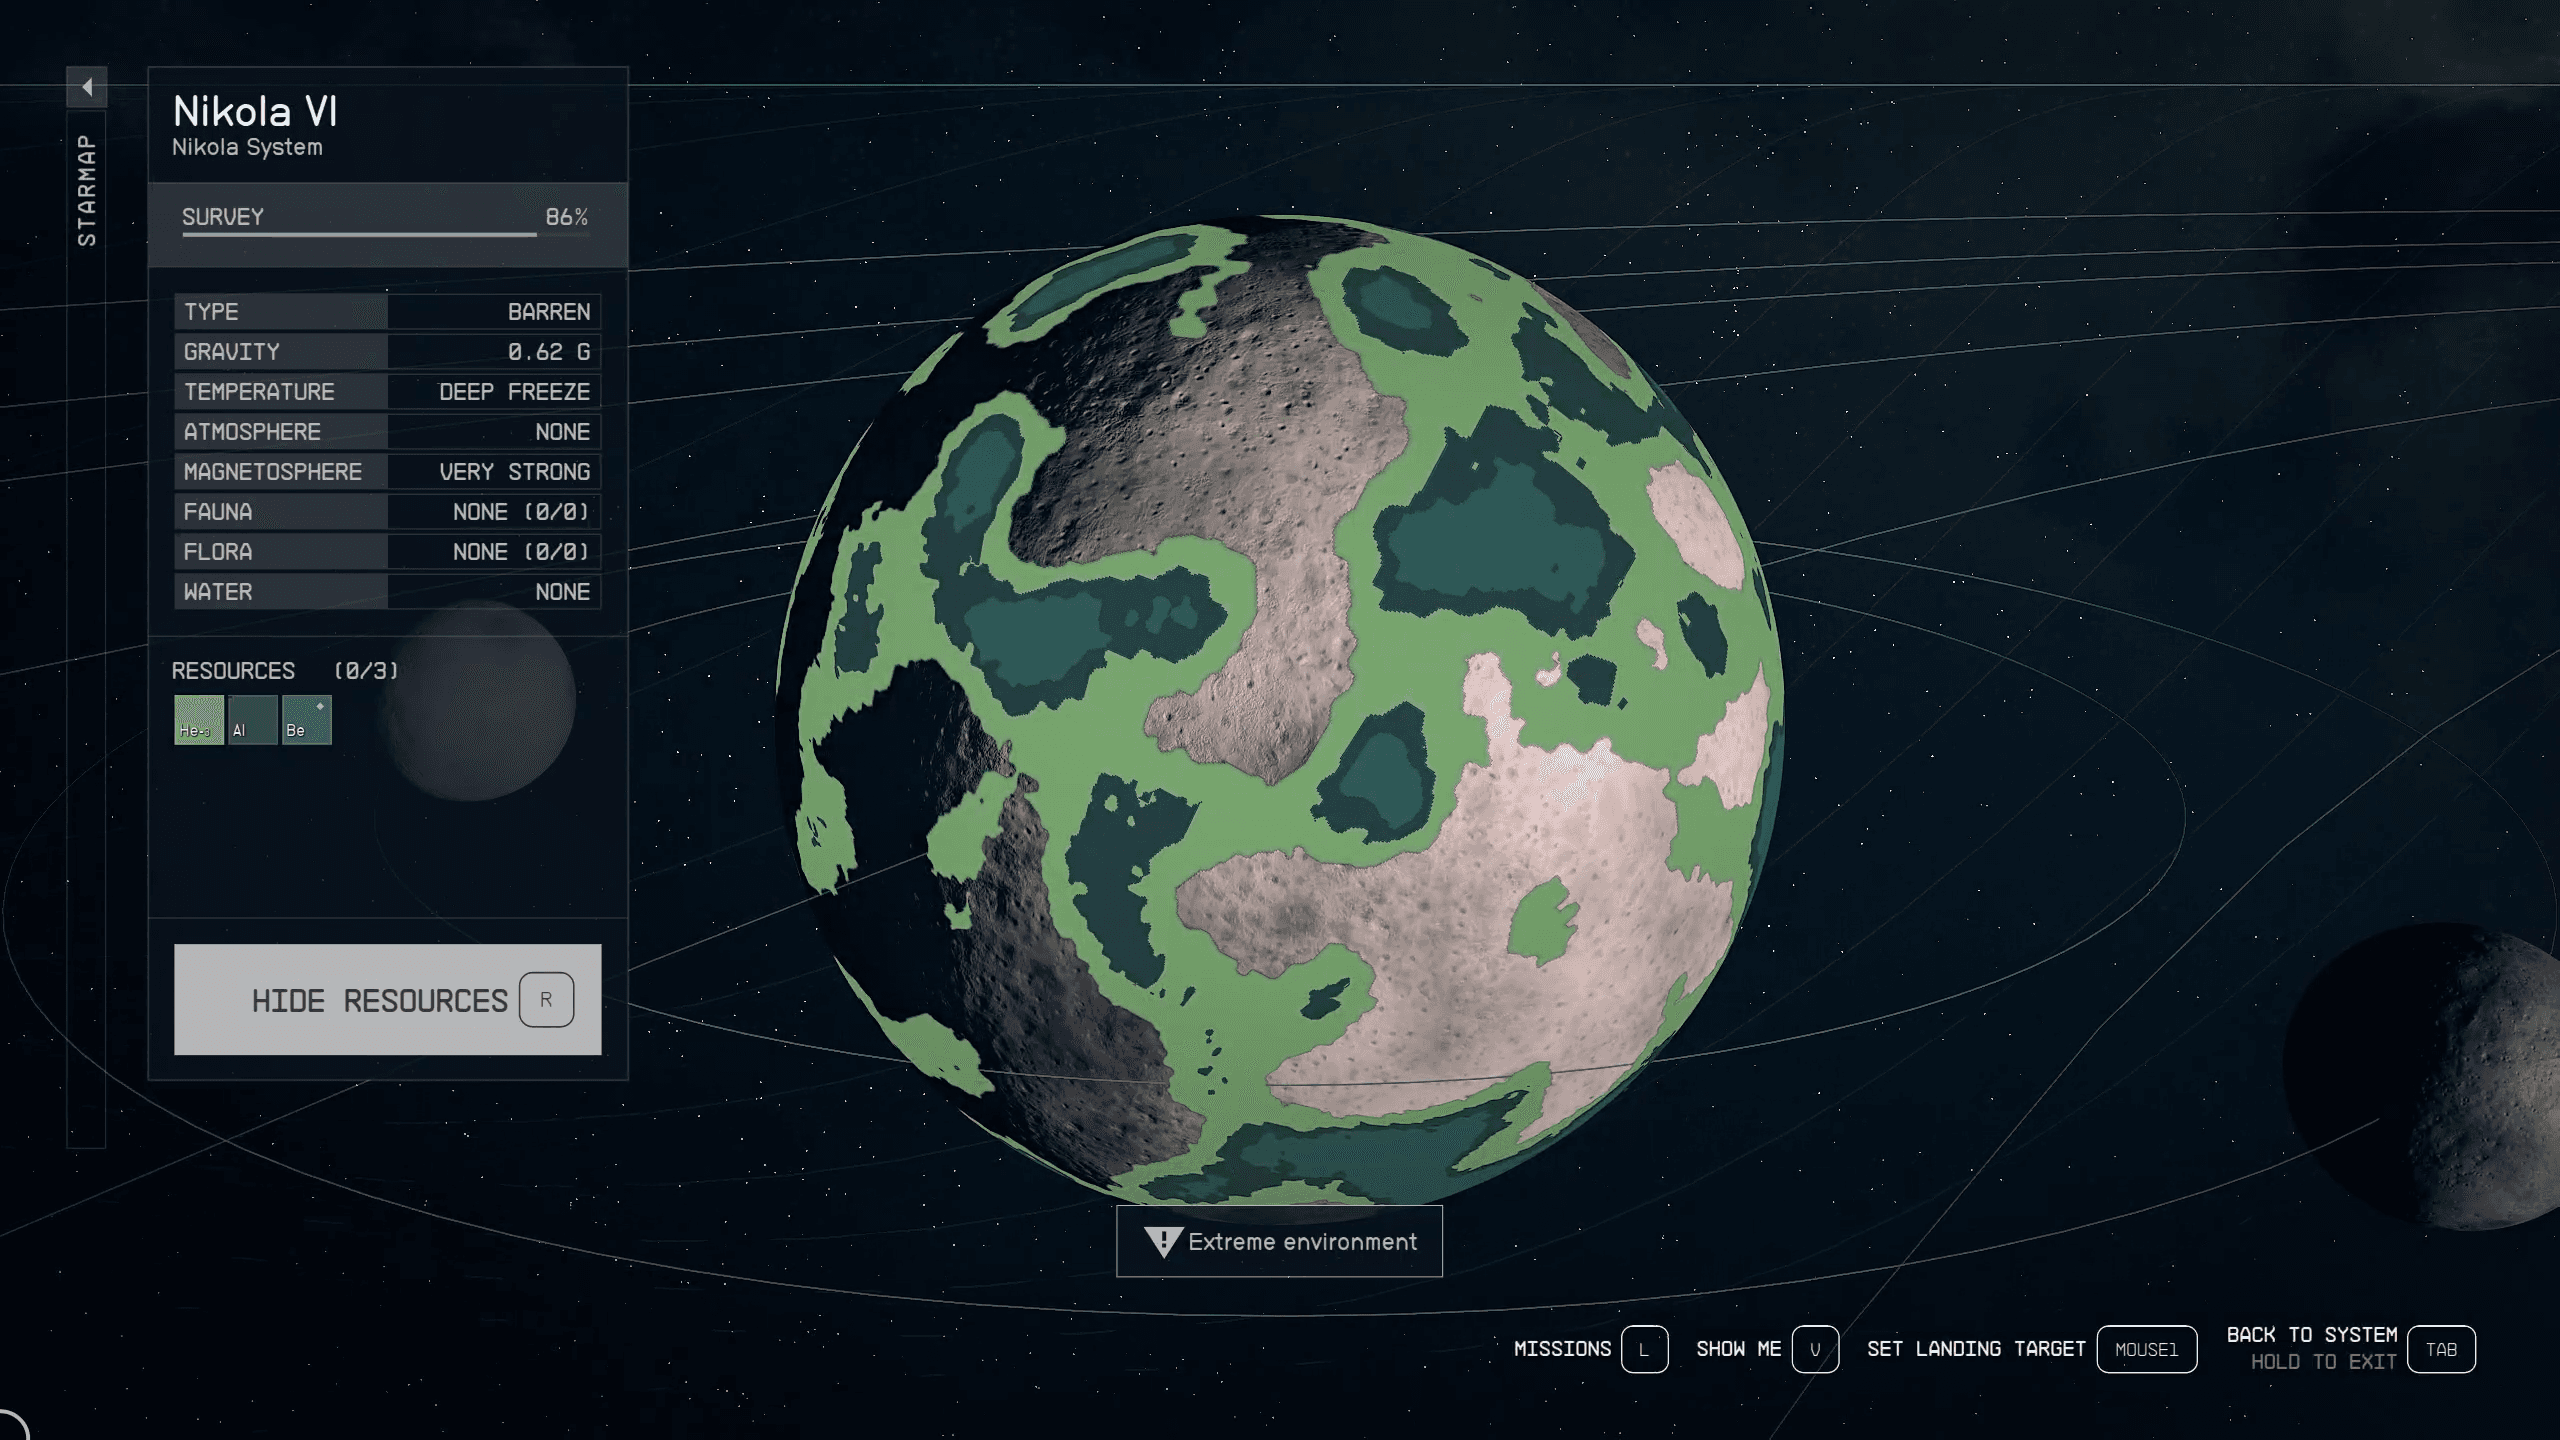 Scanned planet for resources